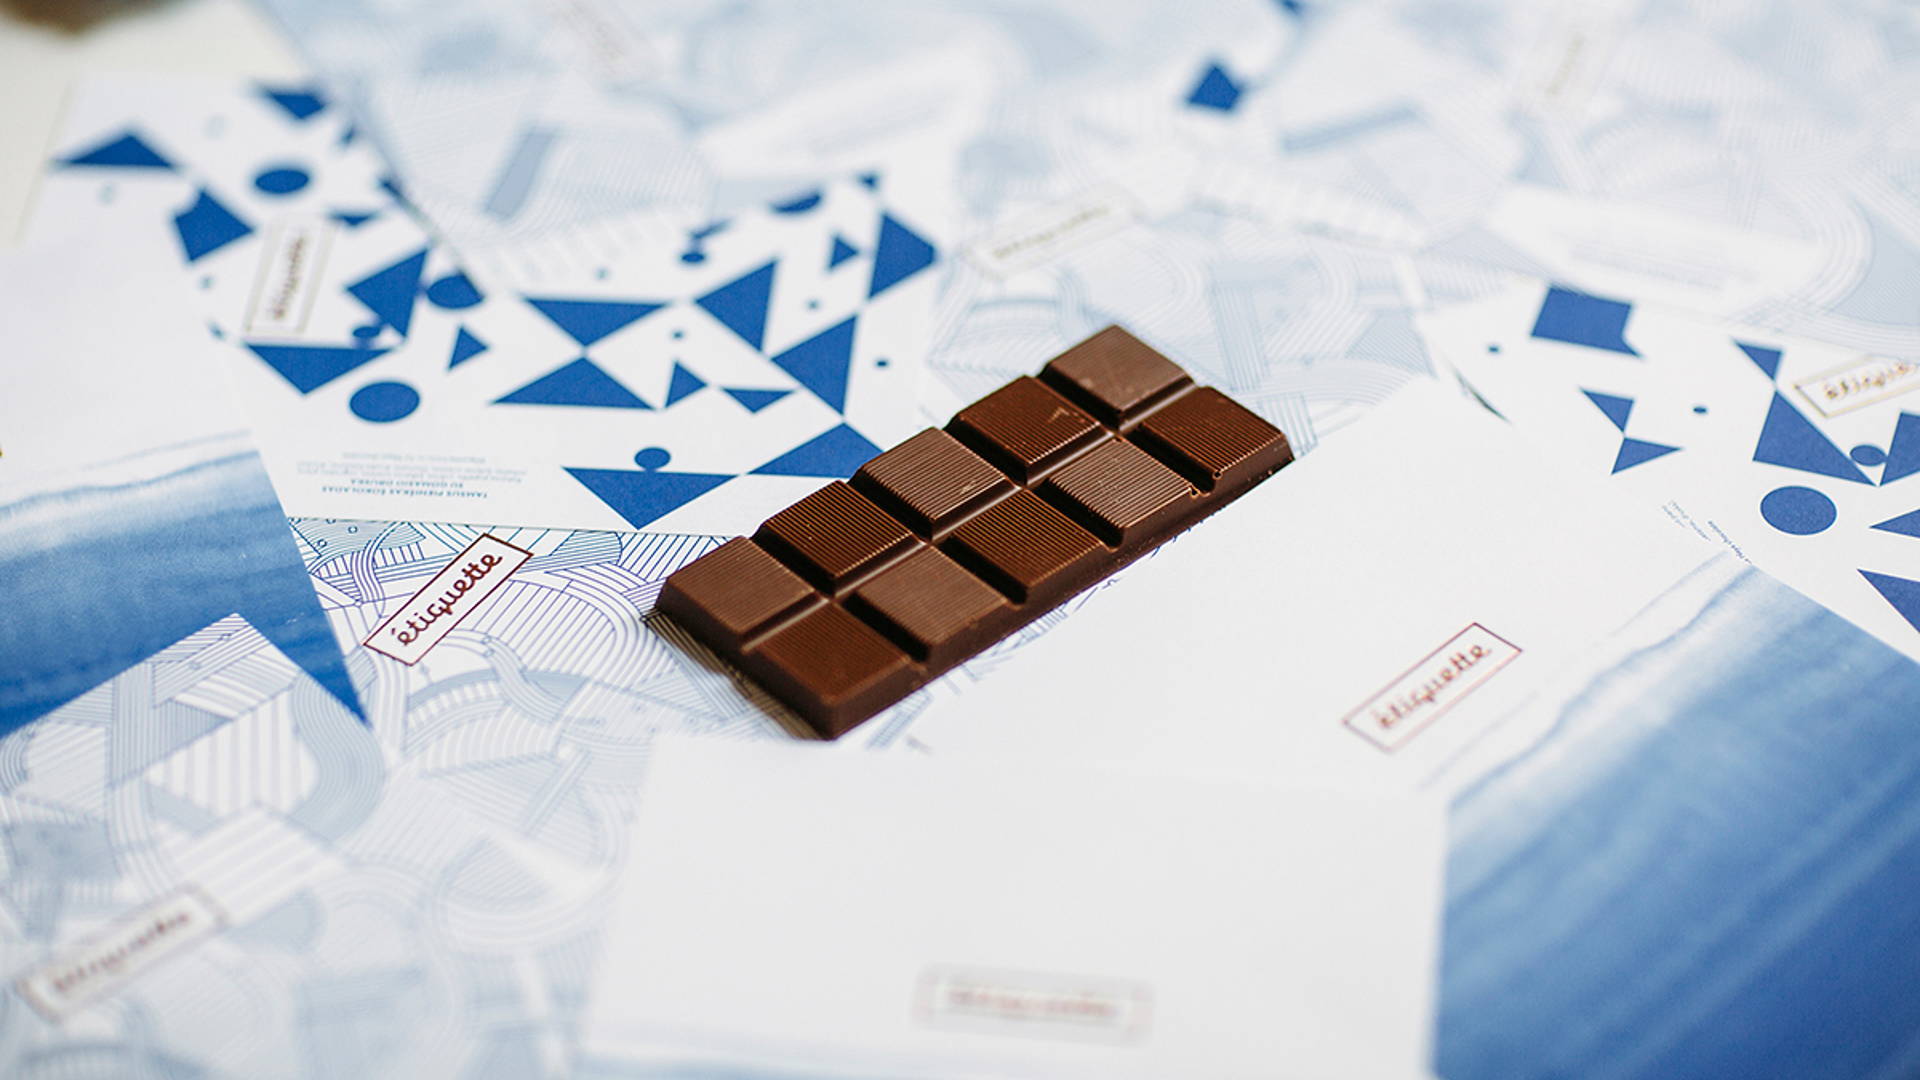 Featured image for These Chocolate Bars Represent The Spirit of a Design Agency